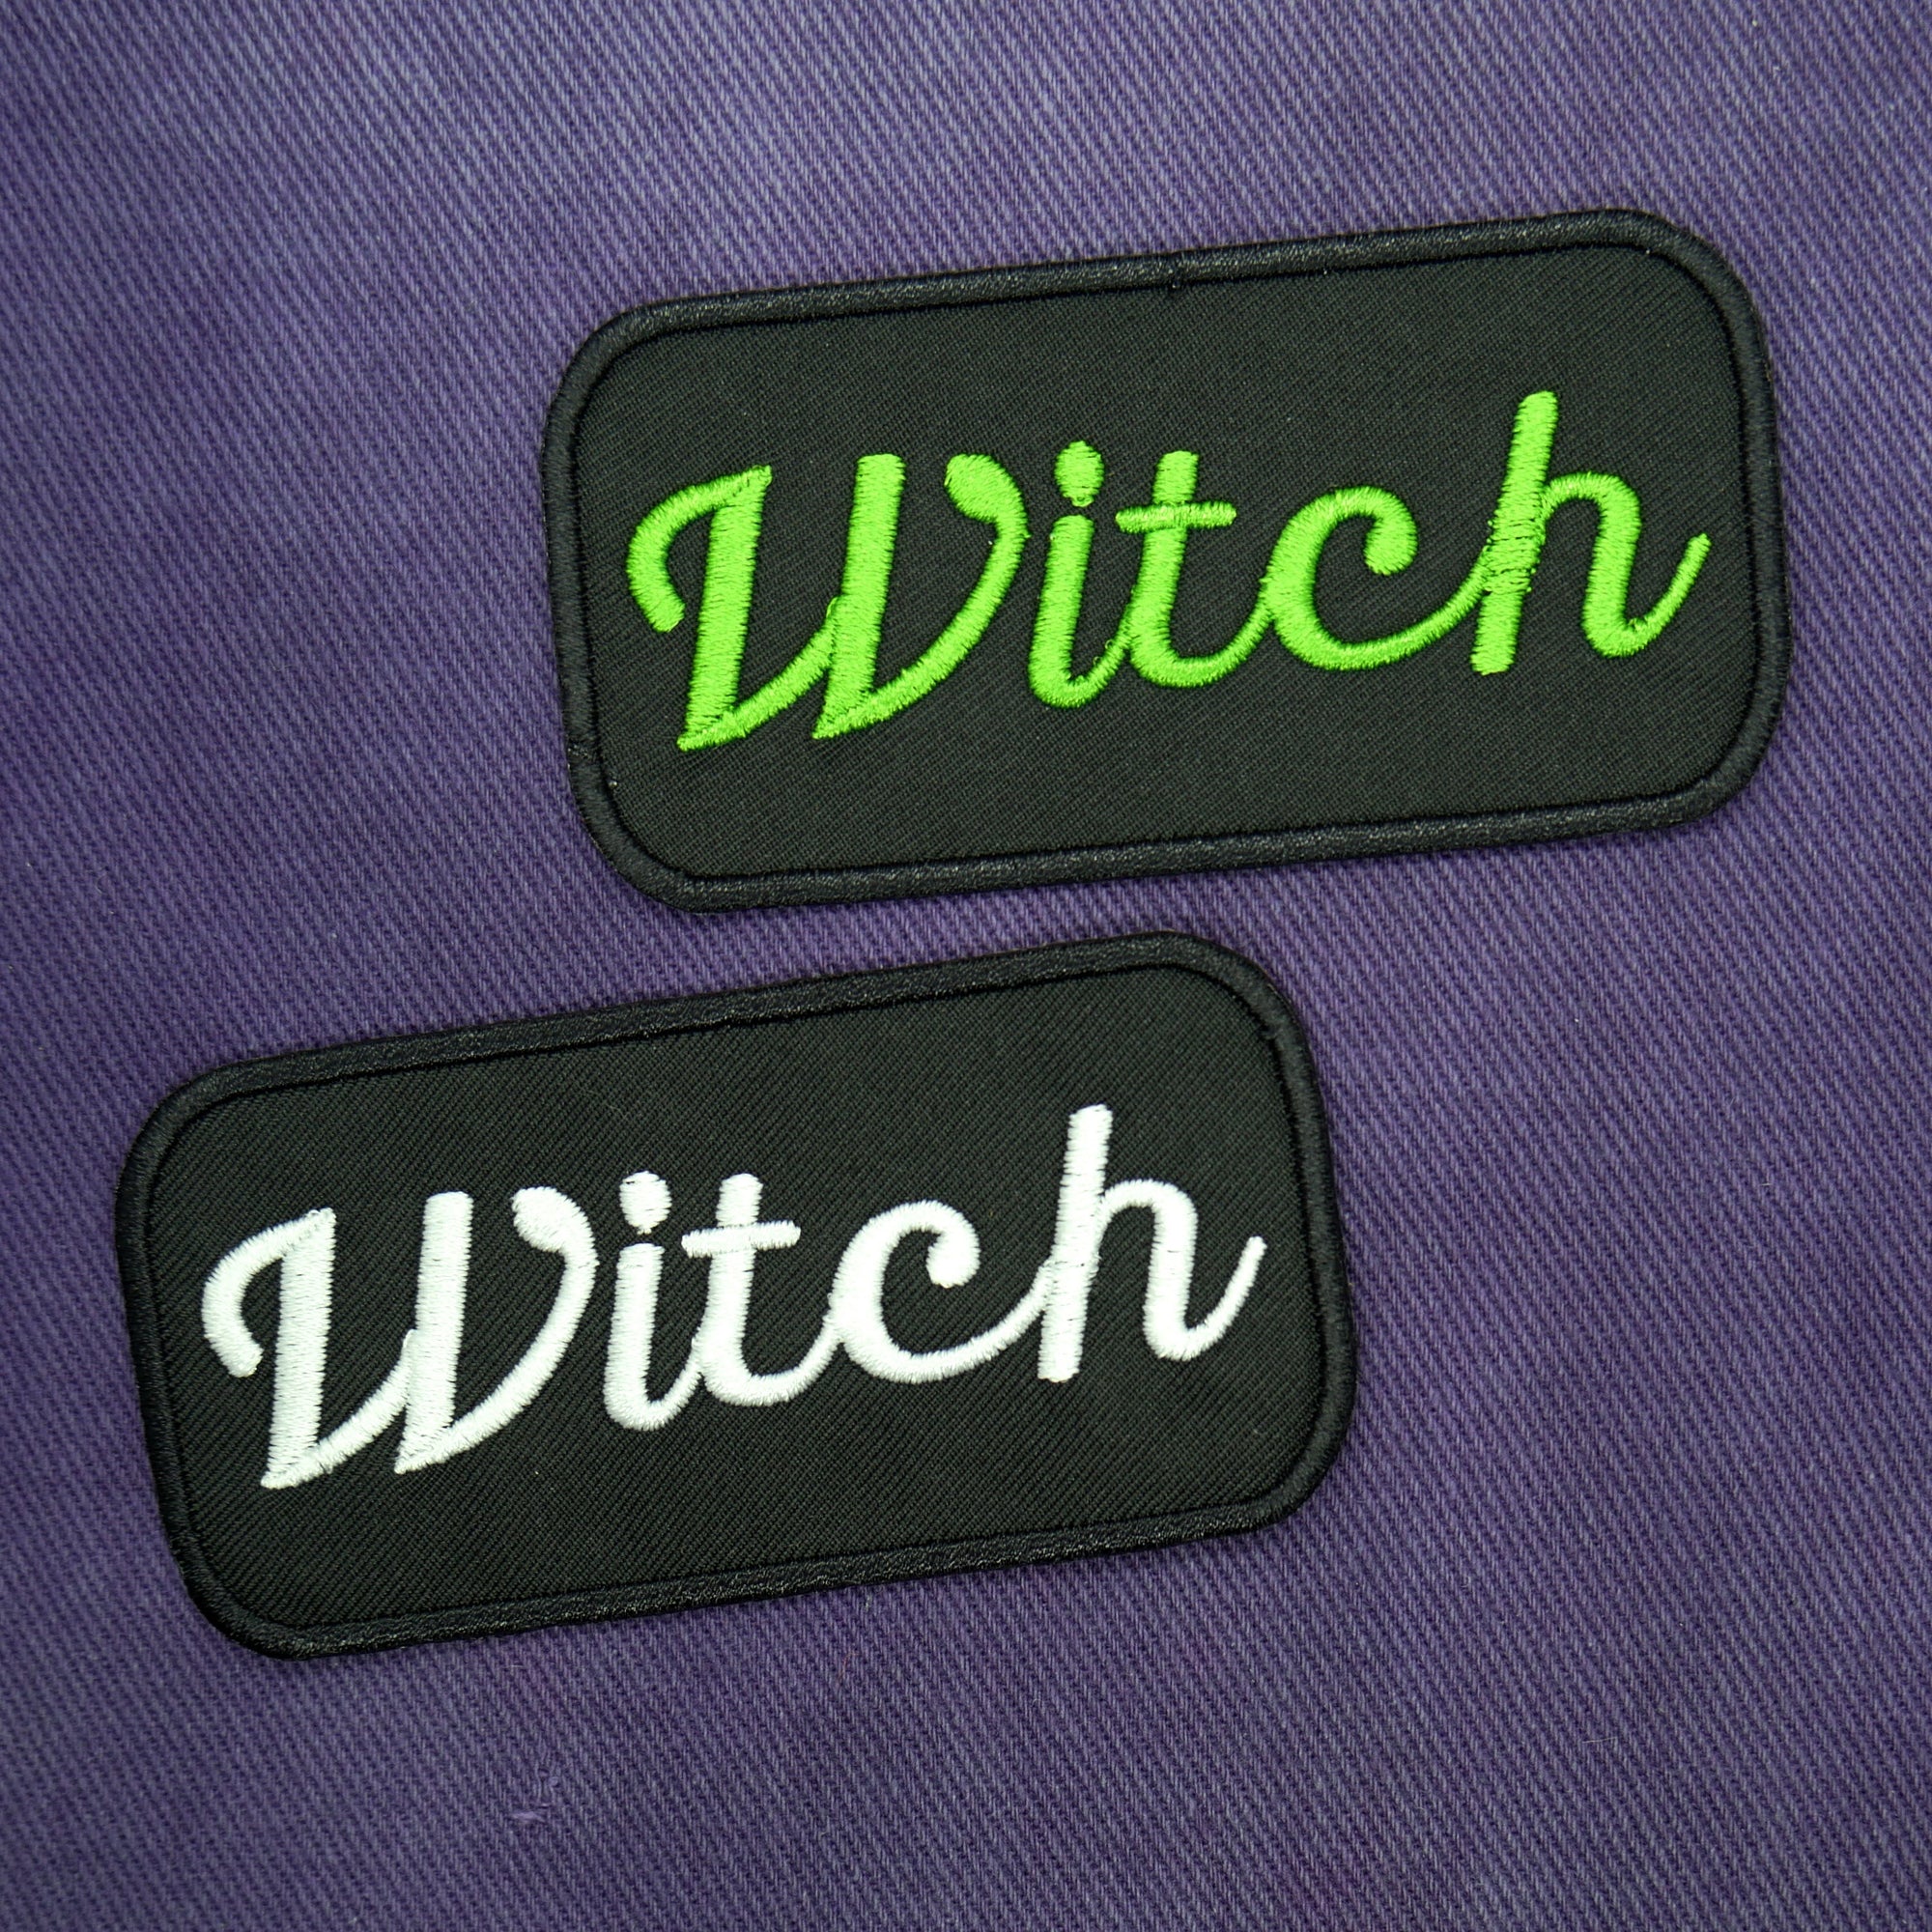 Witch Name Tag Patch